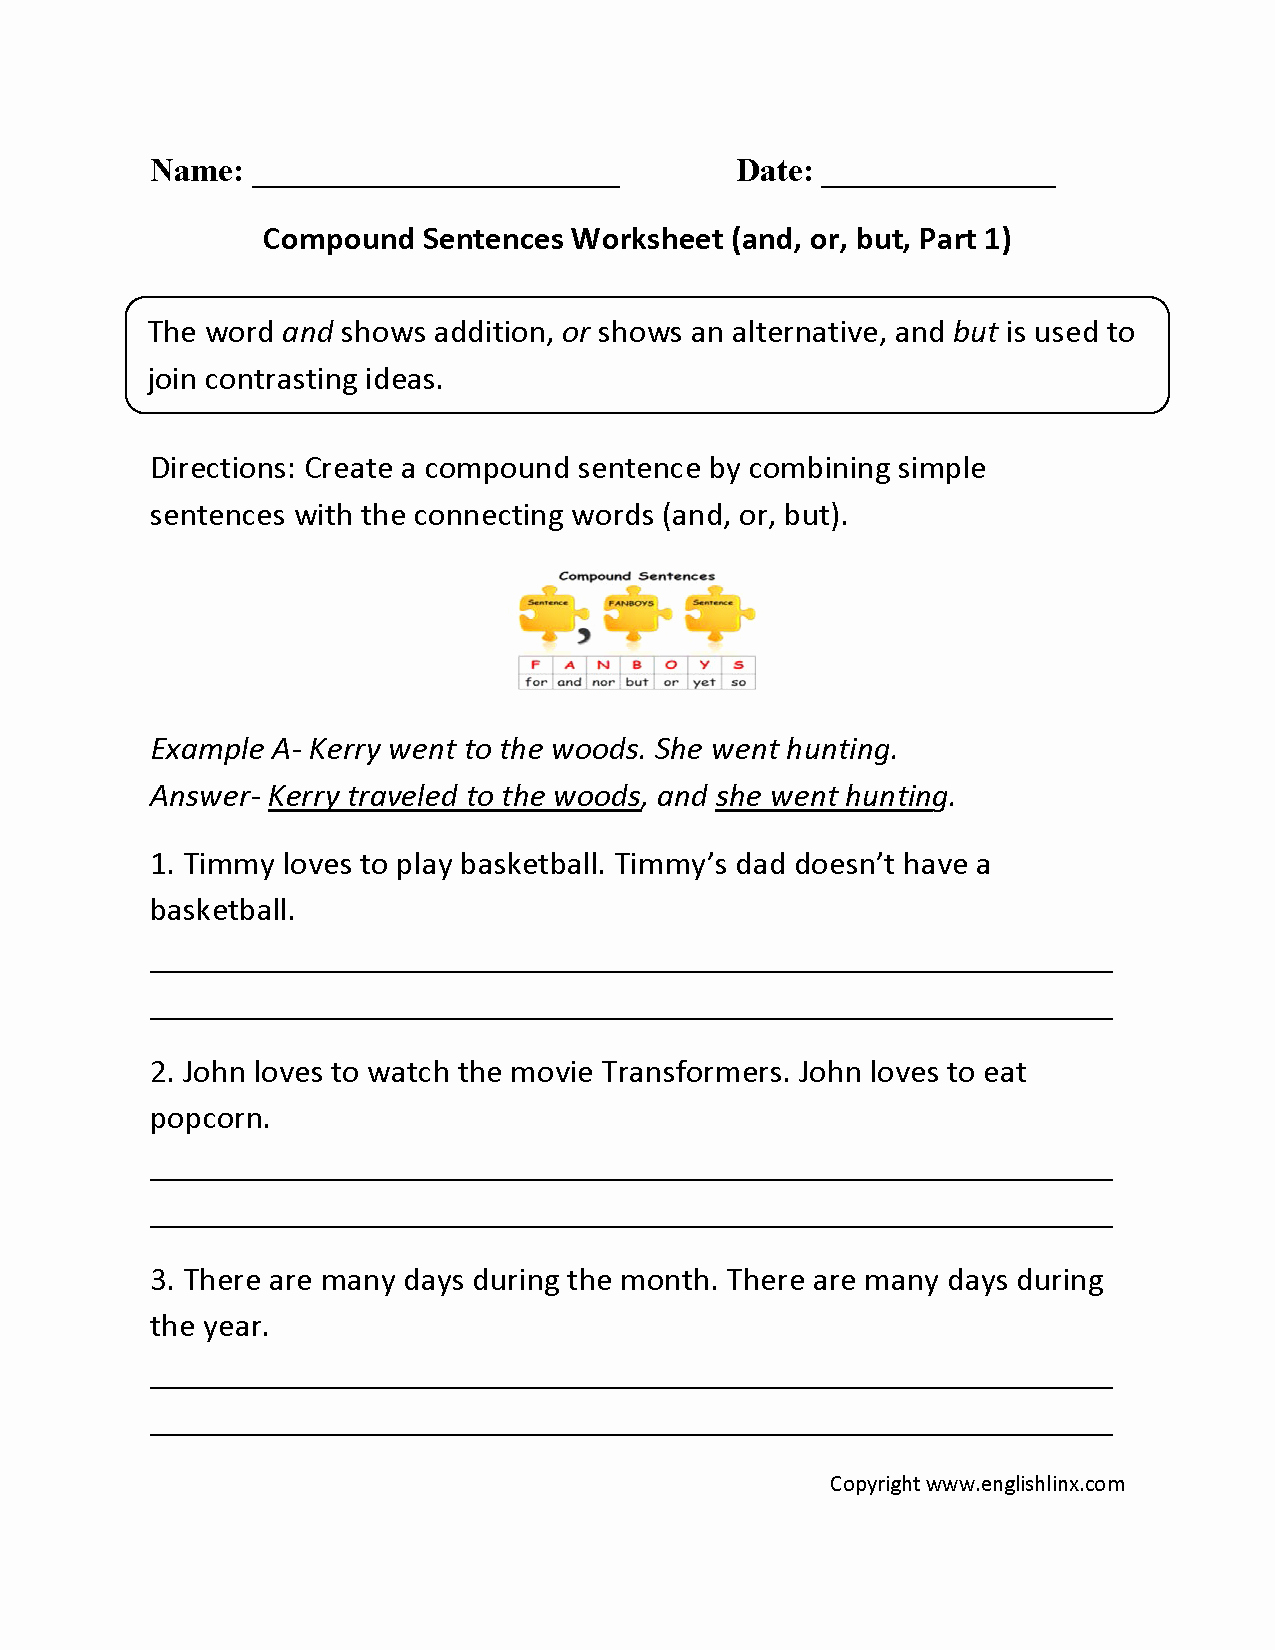 Compound Sentences Worksheet with Answers Awesome Englishlinx